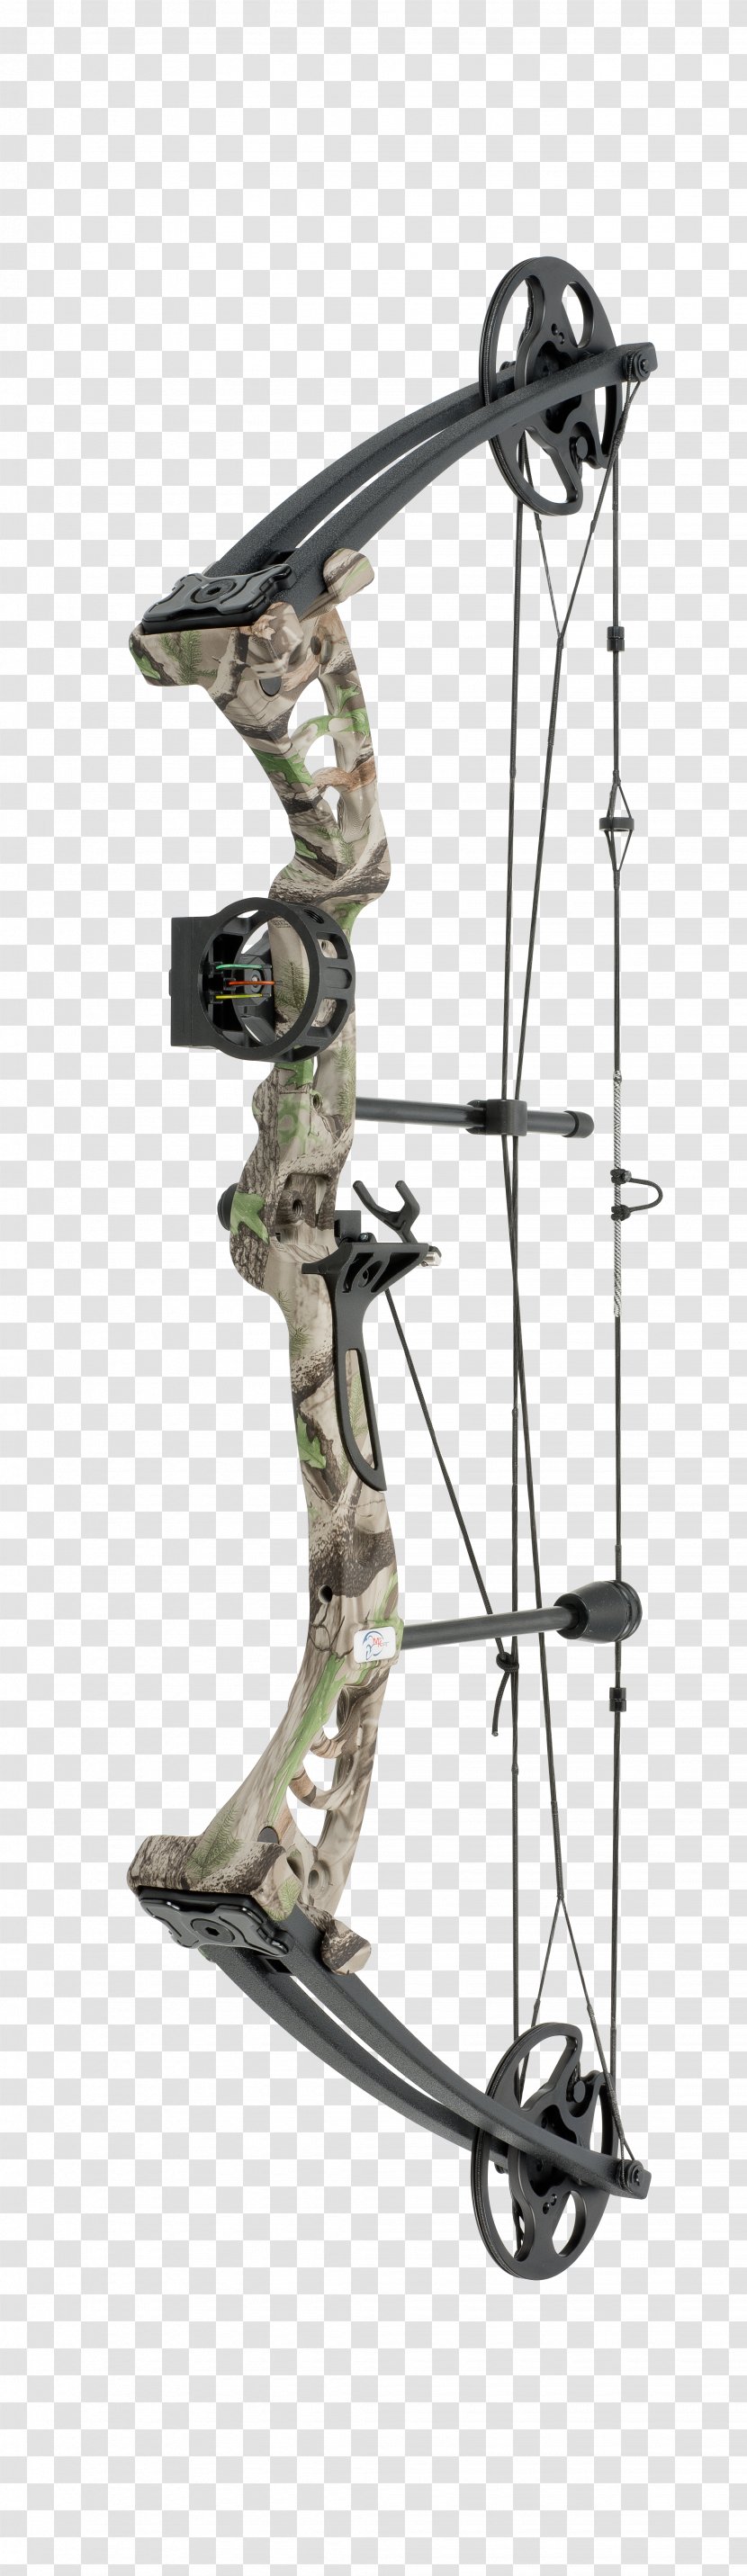 Compound Bows Bow And Arrow Hunting Crossbow - Frame Transparent PNG